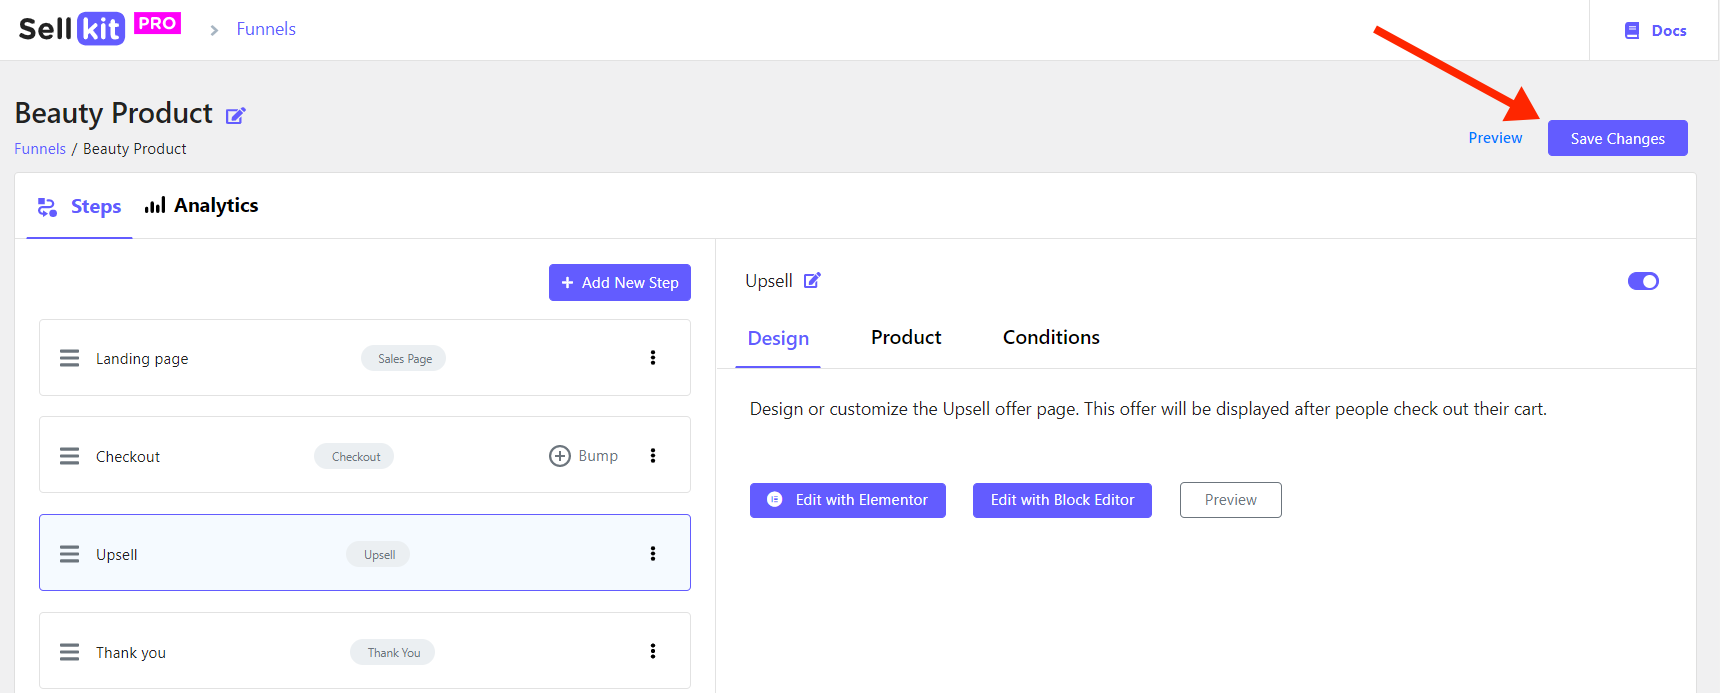 WooCommerce checkout optimization - save changes